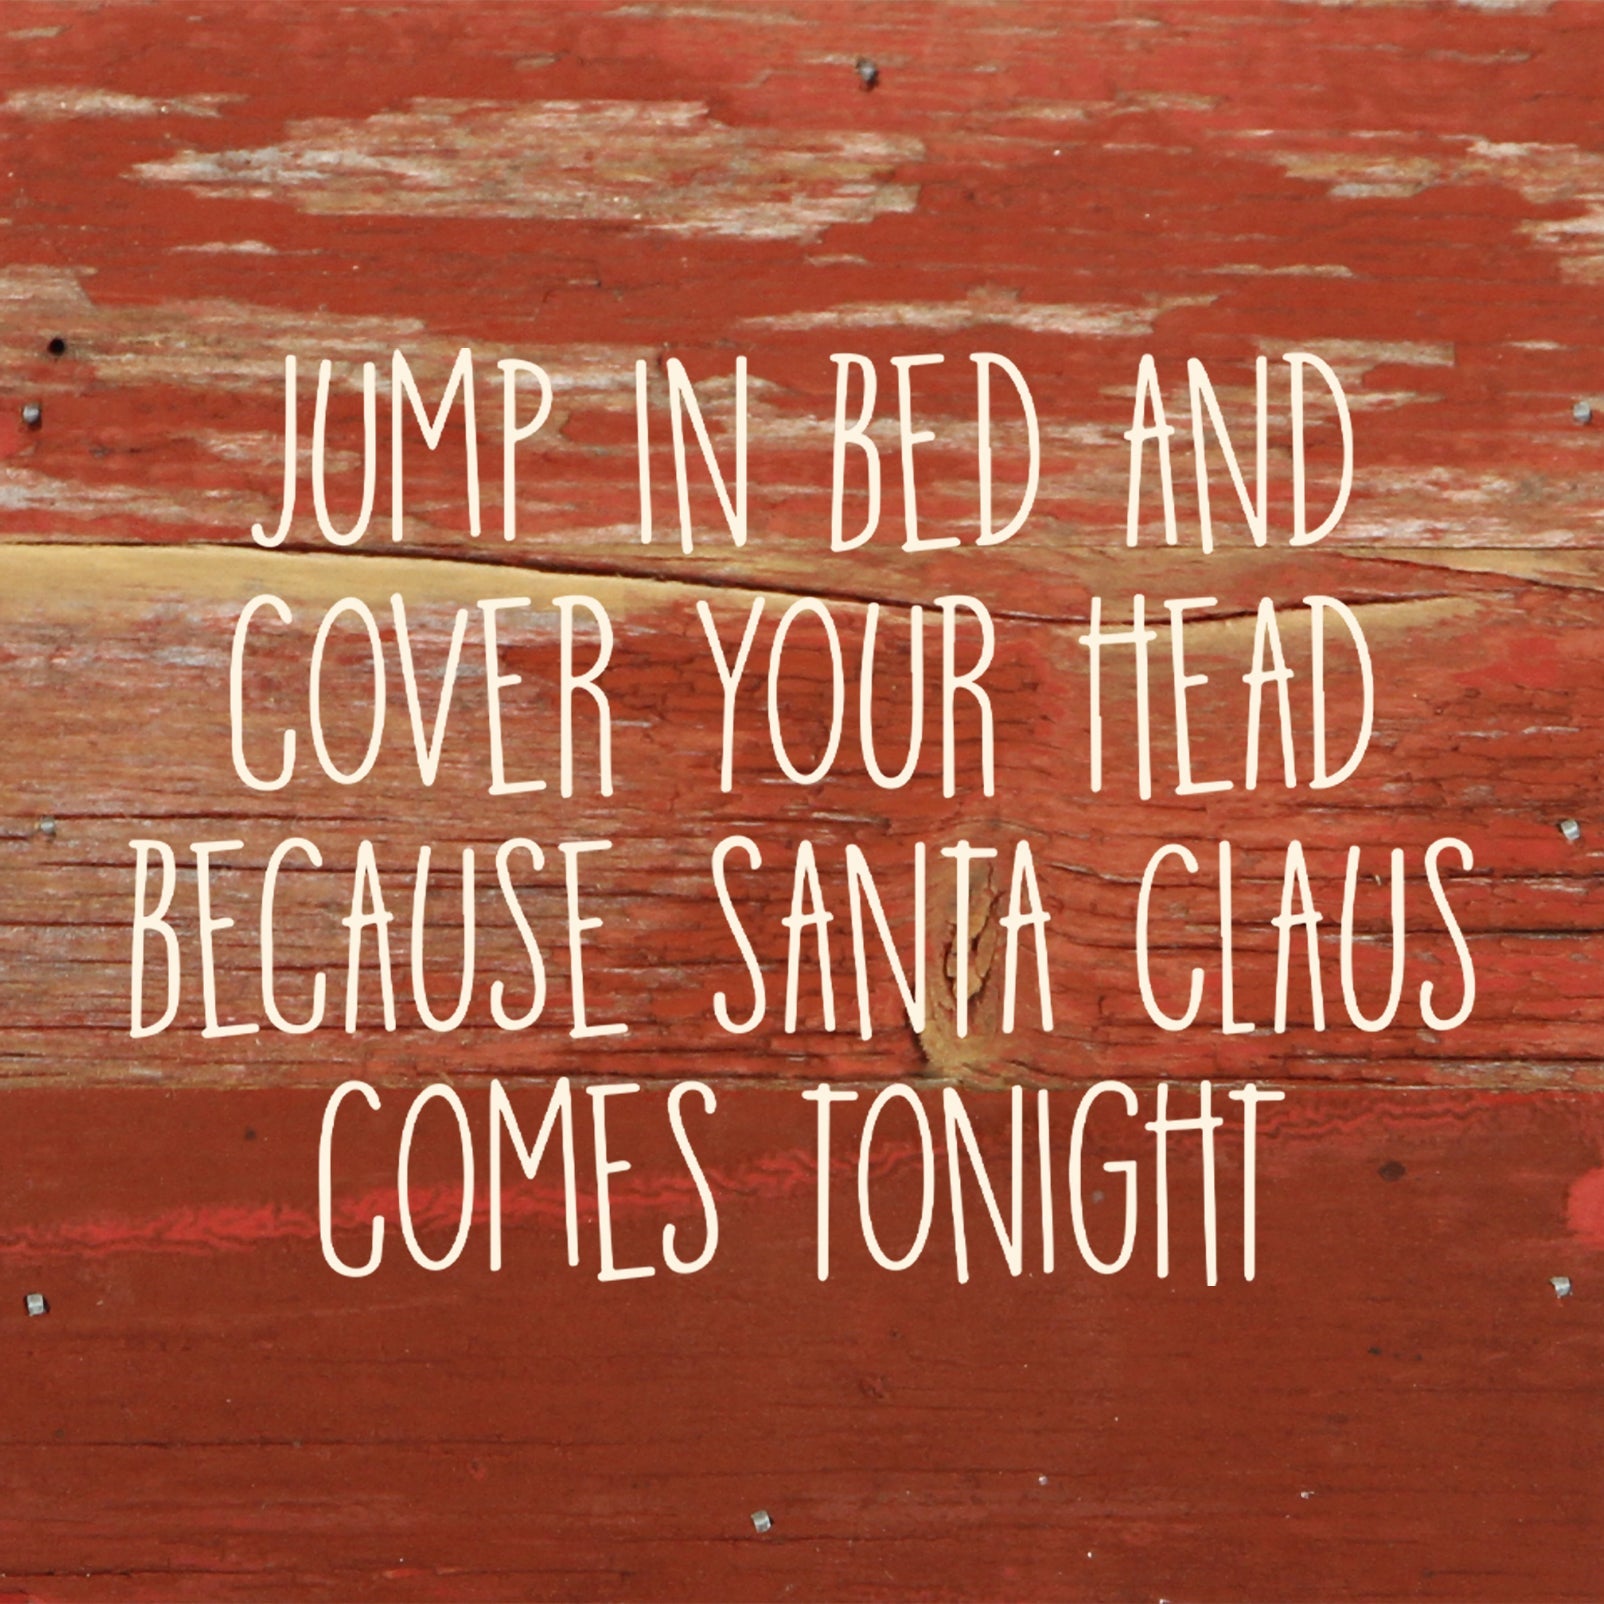 Jump in bed and cover your head because Santa Claus comes tonight / 6"x6" Reclaimed Wood Sign